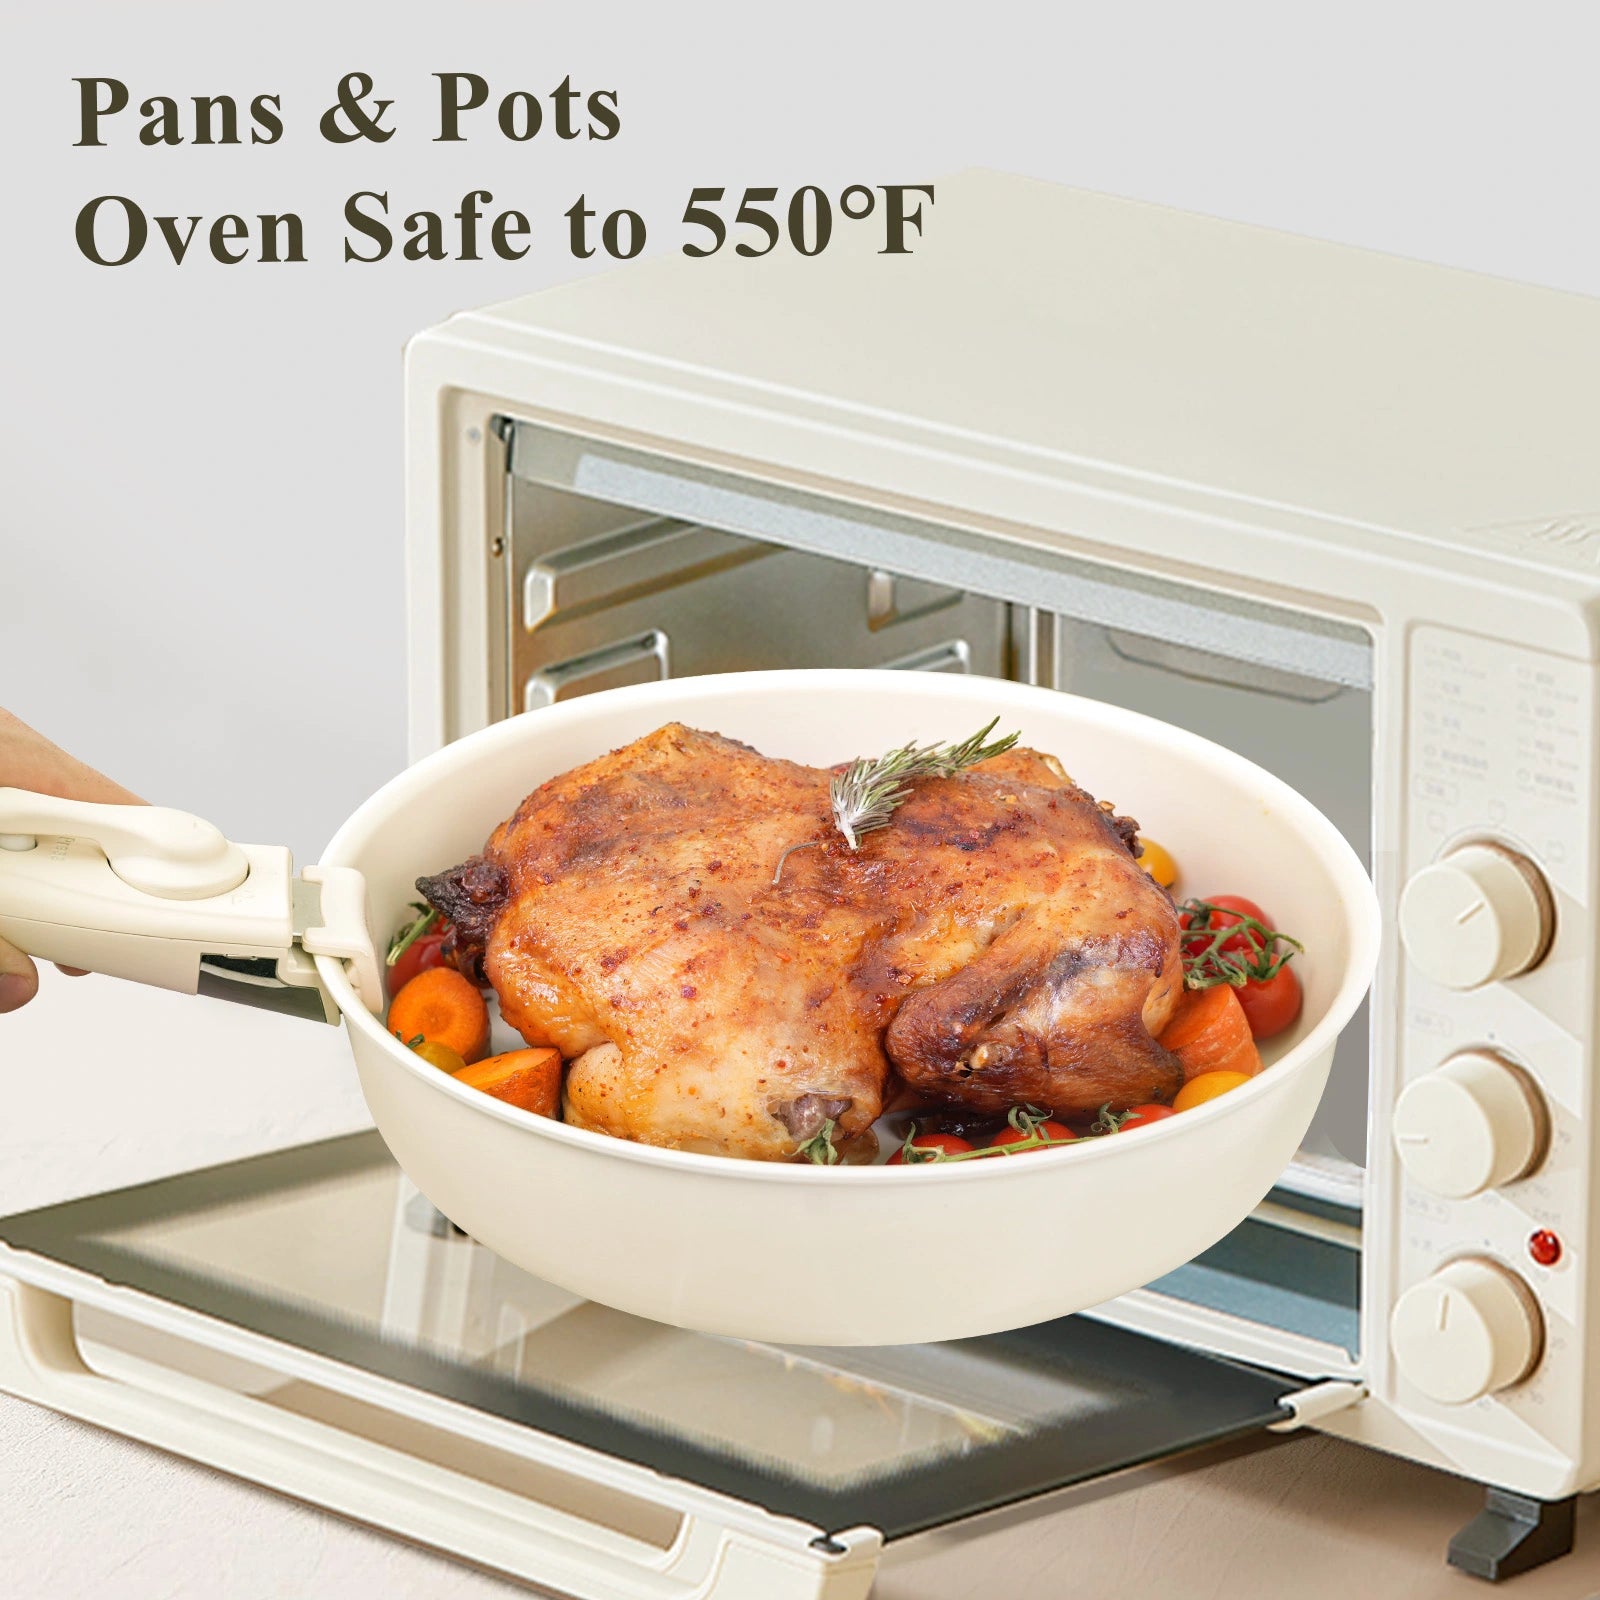 Ceramic Pans and Pots Oven Safe to 550°F